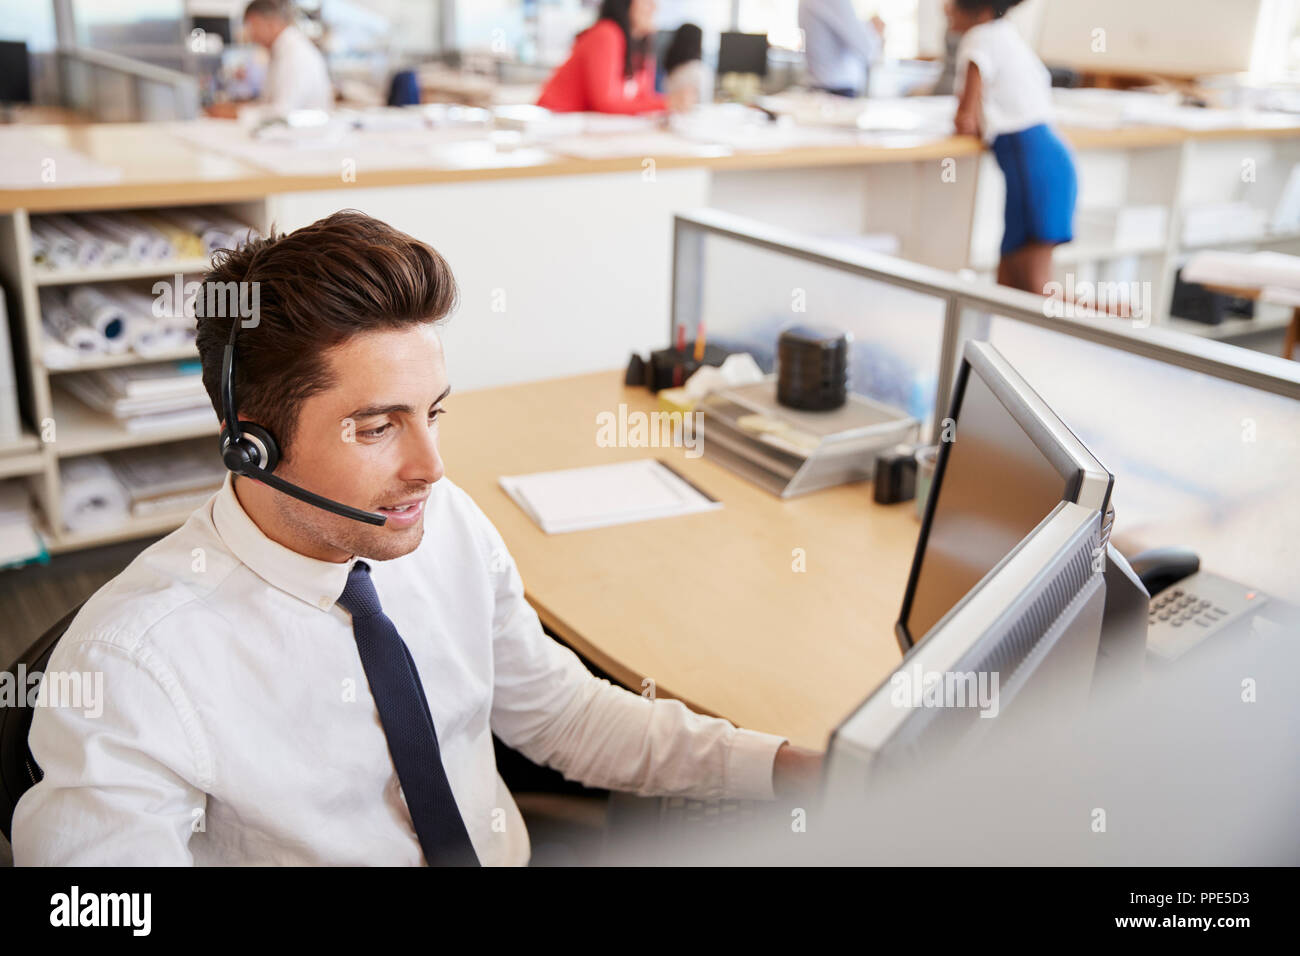 Hispanic male call centre worker at work, elevated view Stock Photo